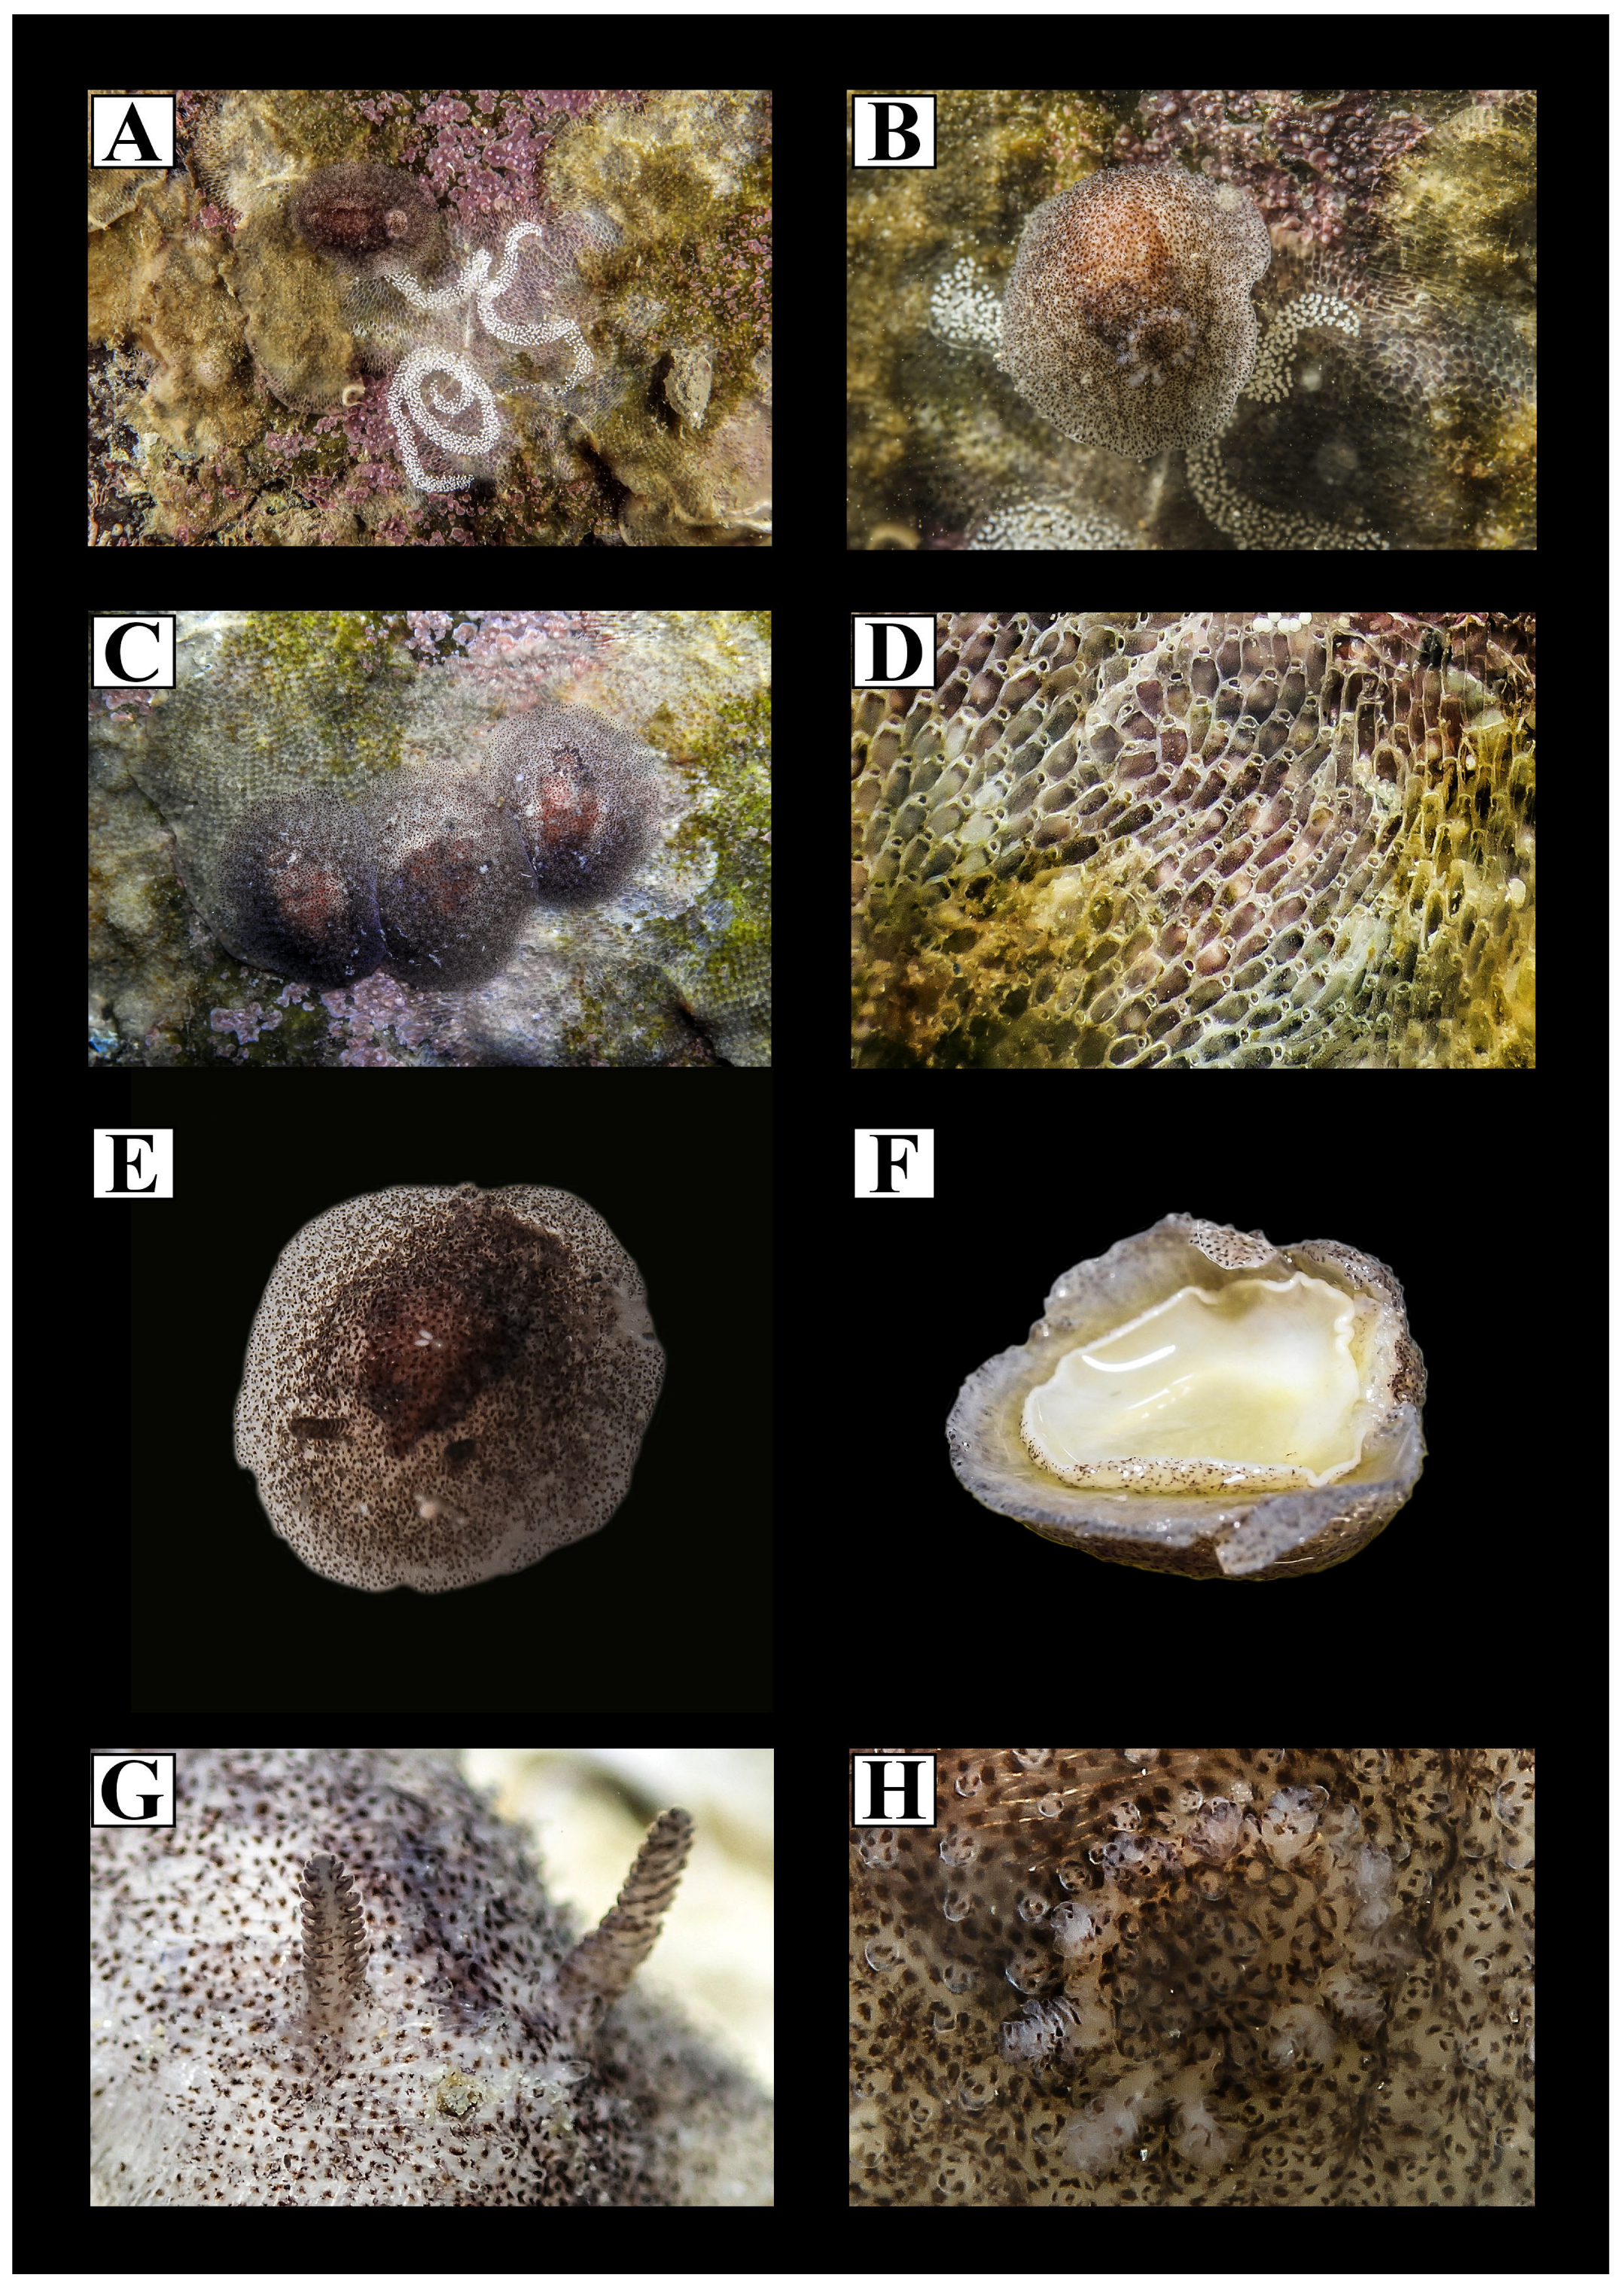 Diversity | Free Full-Text | Mediterranean Matters: Revision of the Family  Onchidorididae (Mollusca, Nudibranchia) with the Description of a New Genus  and a New Species